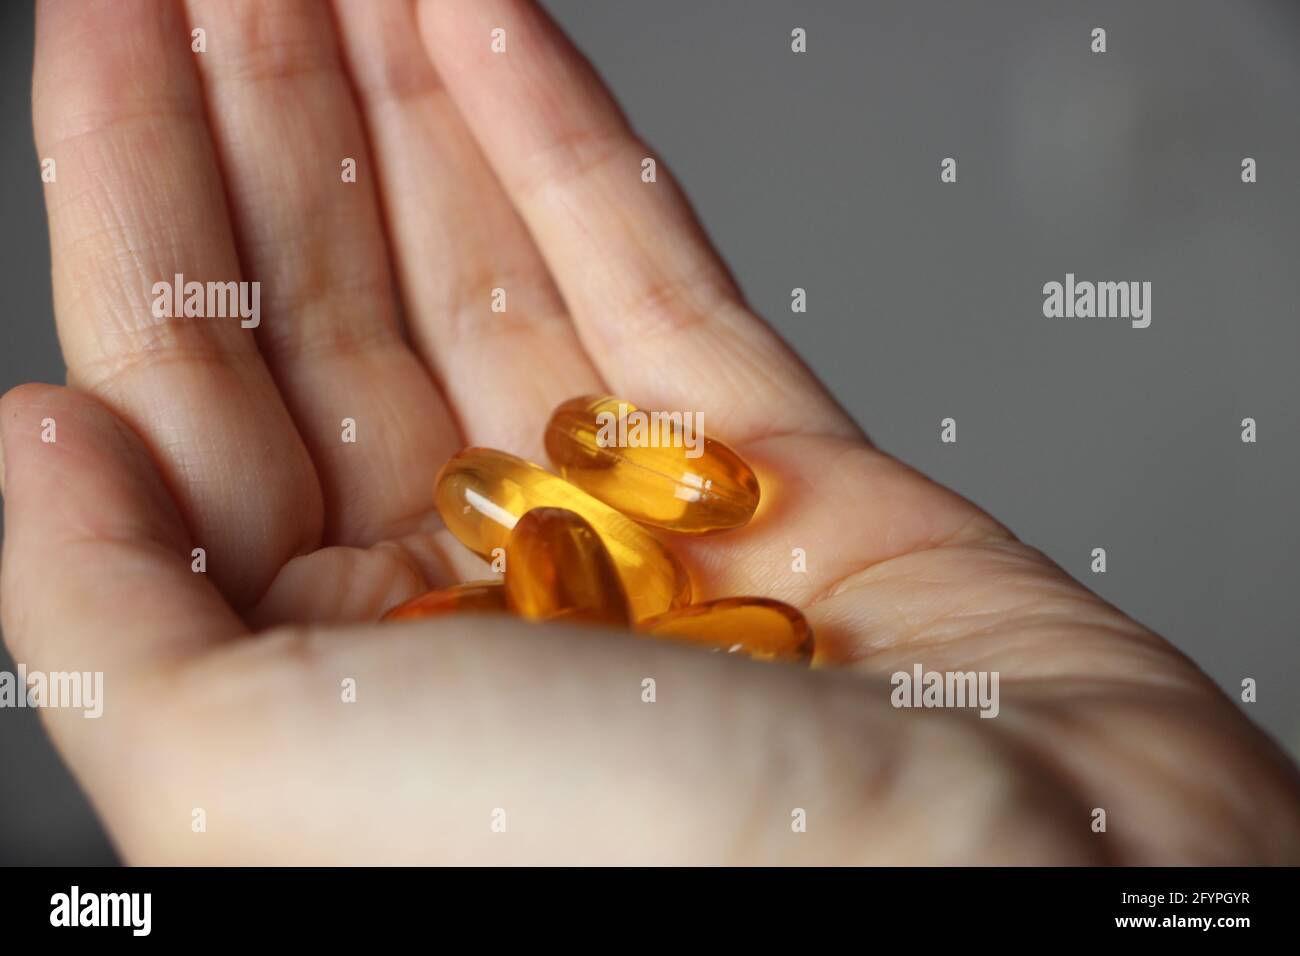 Medicine, nutritional supplements and people concept - close up of hands holding cod liver oil capsules. Hands of a woman holding fish oil Omega-3 cap Stock Photo